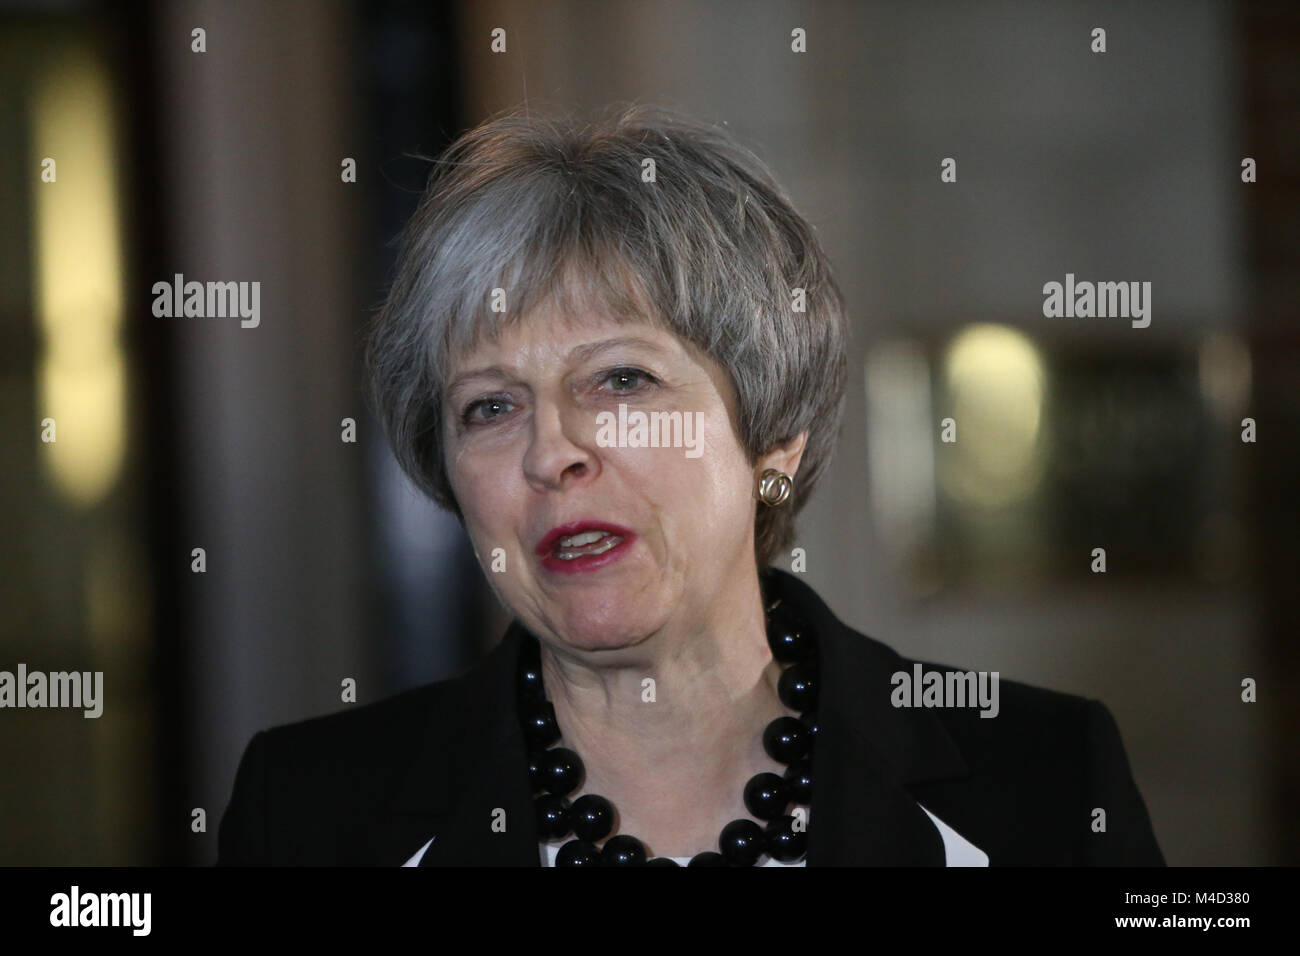 British Prime Minister Theresa May speaks to the media at Stormont,  Belfast, Monday, Feb 12th, 2018. Britain's Prime Minister Theresa May and Irish Prime Minister Leo Varadkar are to visit Belfast later for talks with the Stormont parties. The Prime Ministers left without a deal to restore devolved government. Photo/Paul McErlane Stock Photo